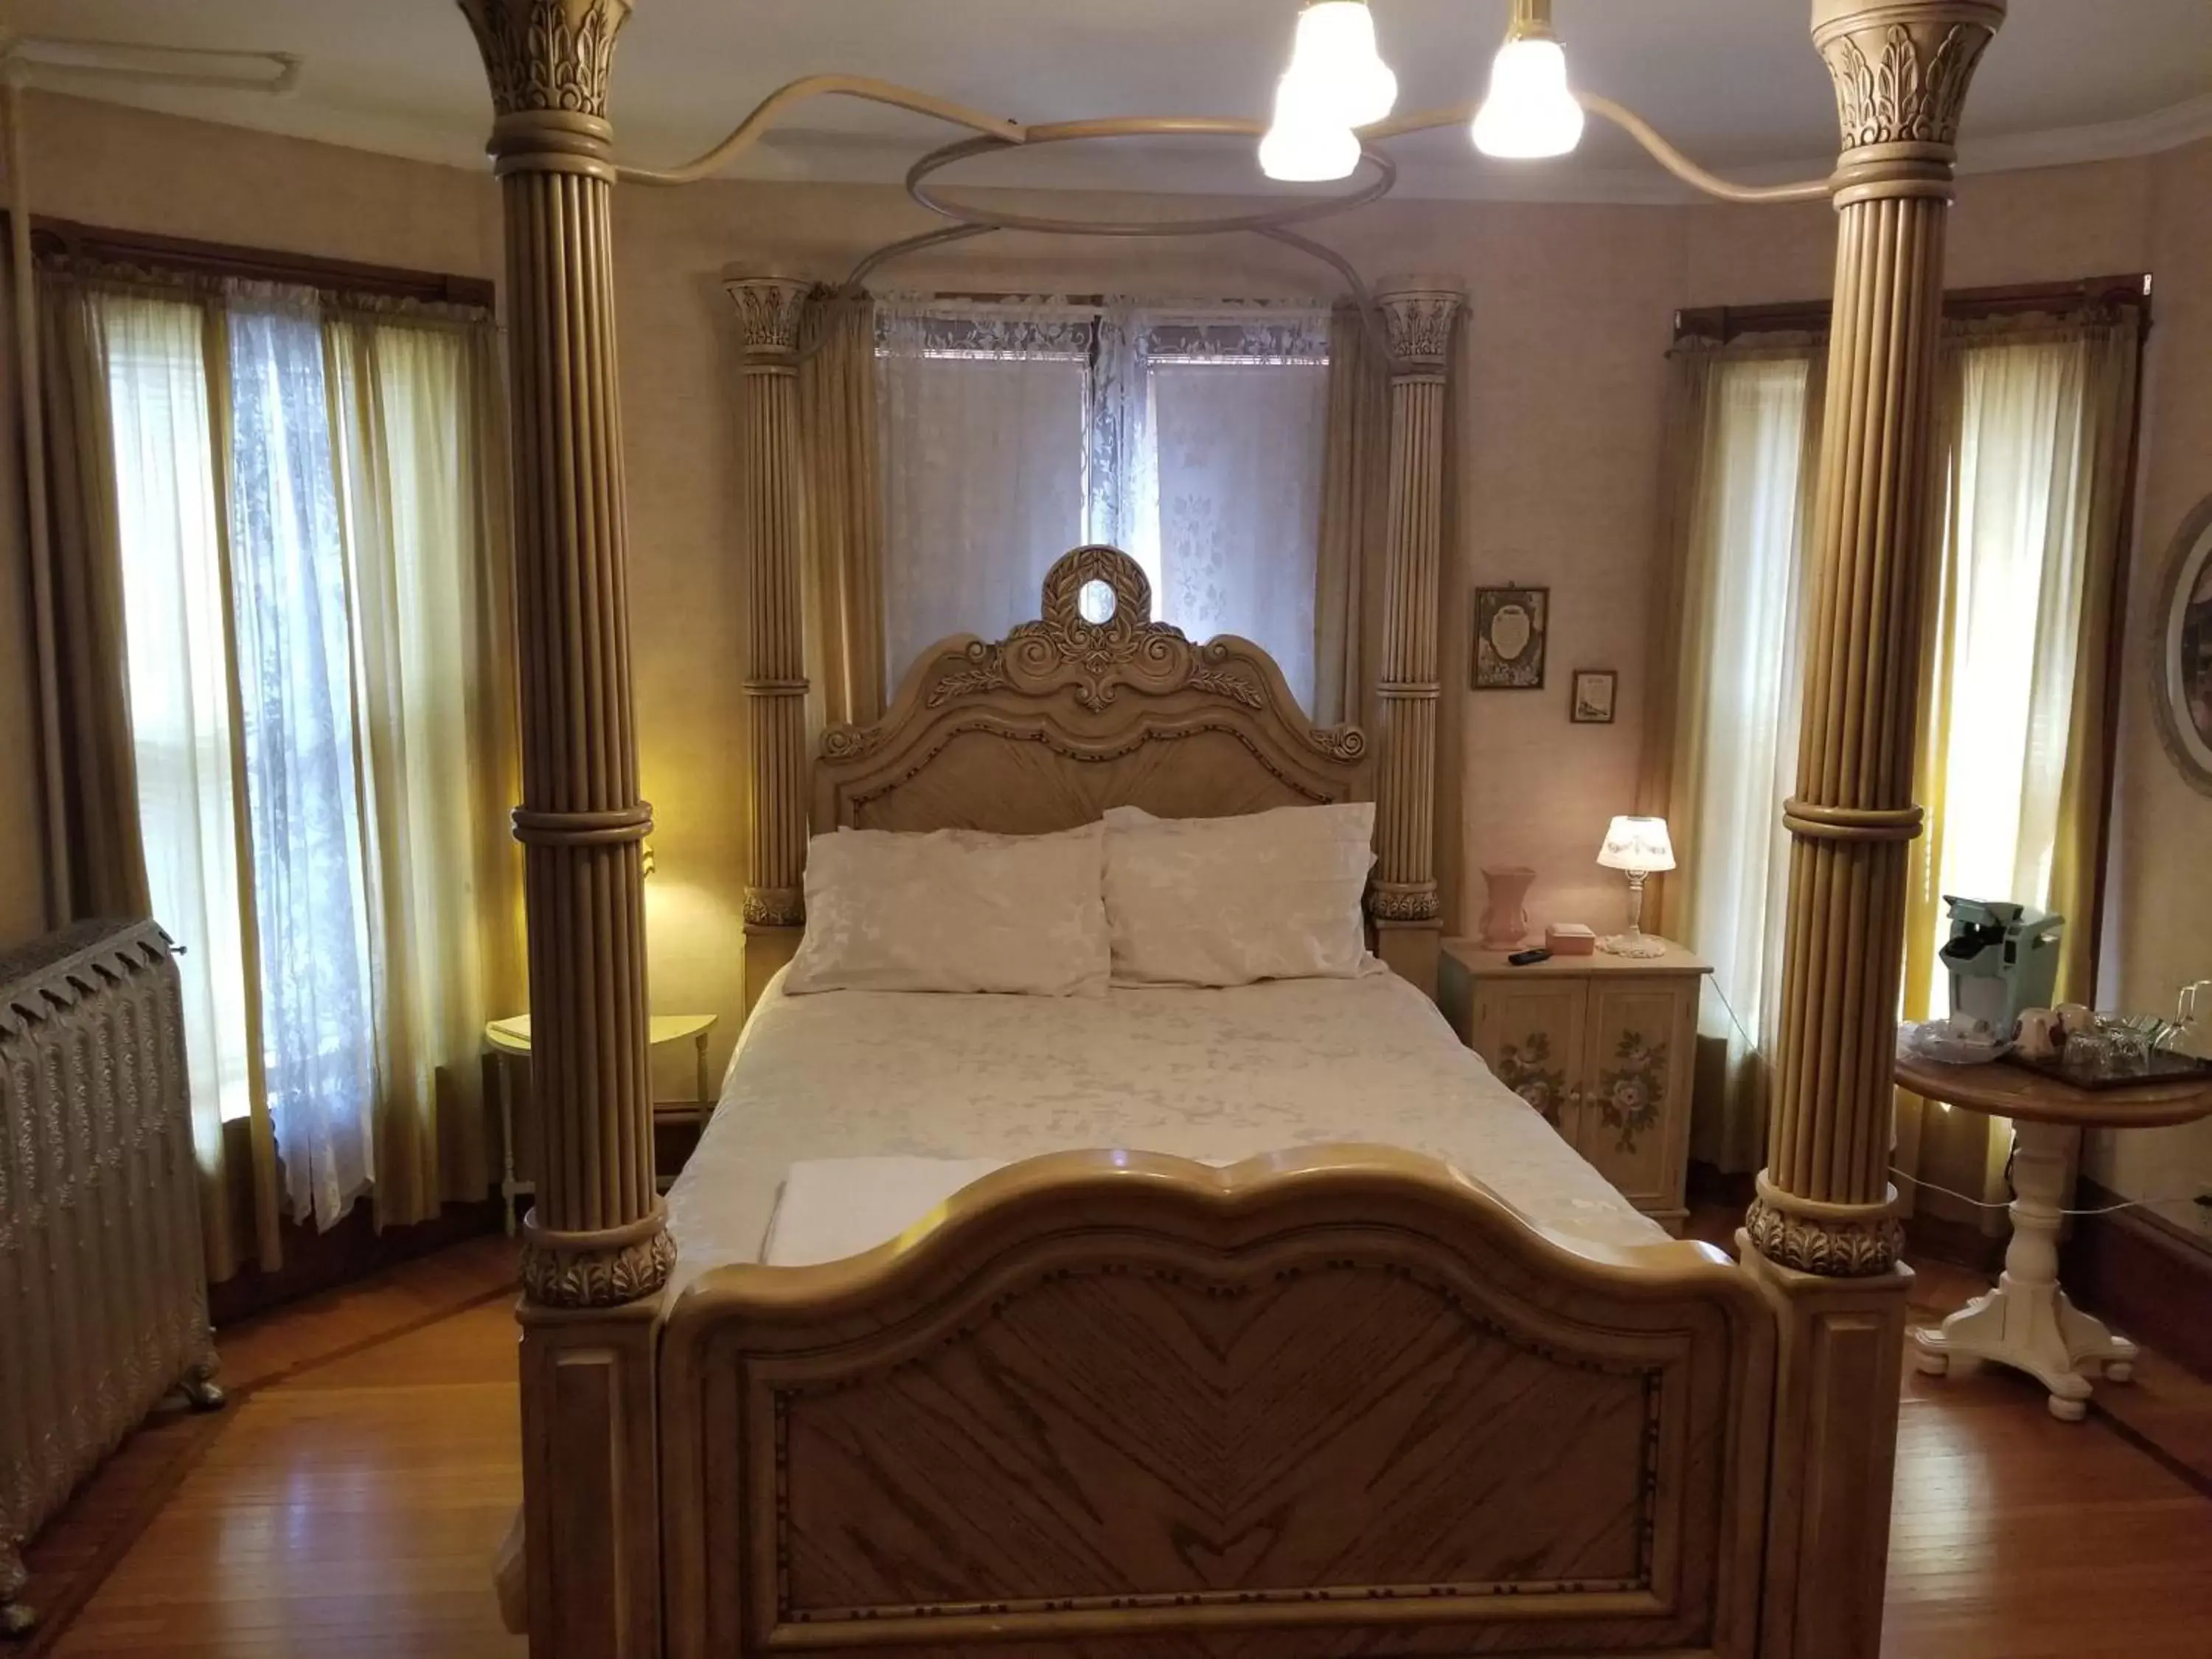 Bed, Room Photo in Historic Victorian Inn